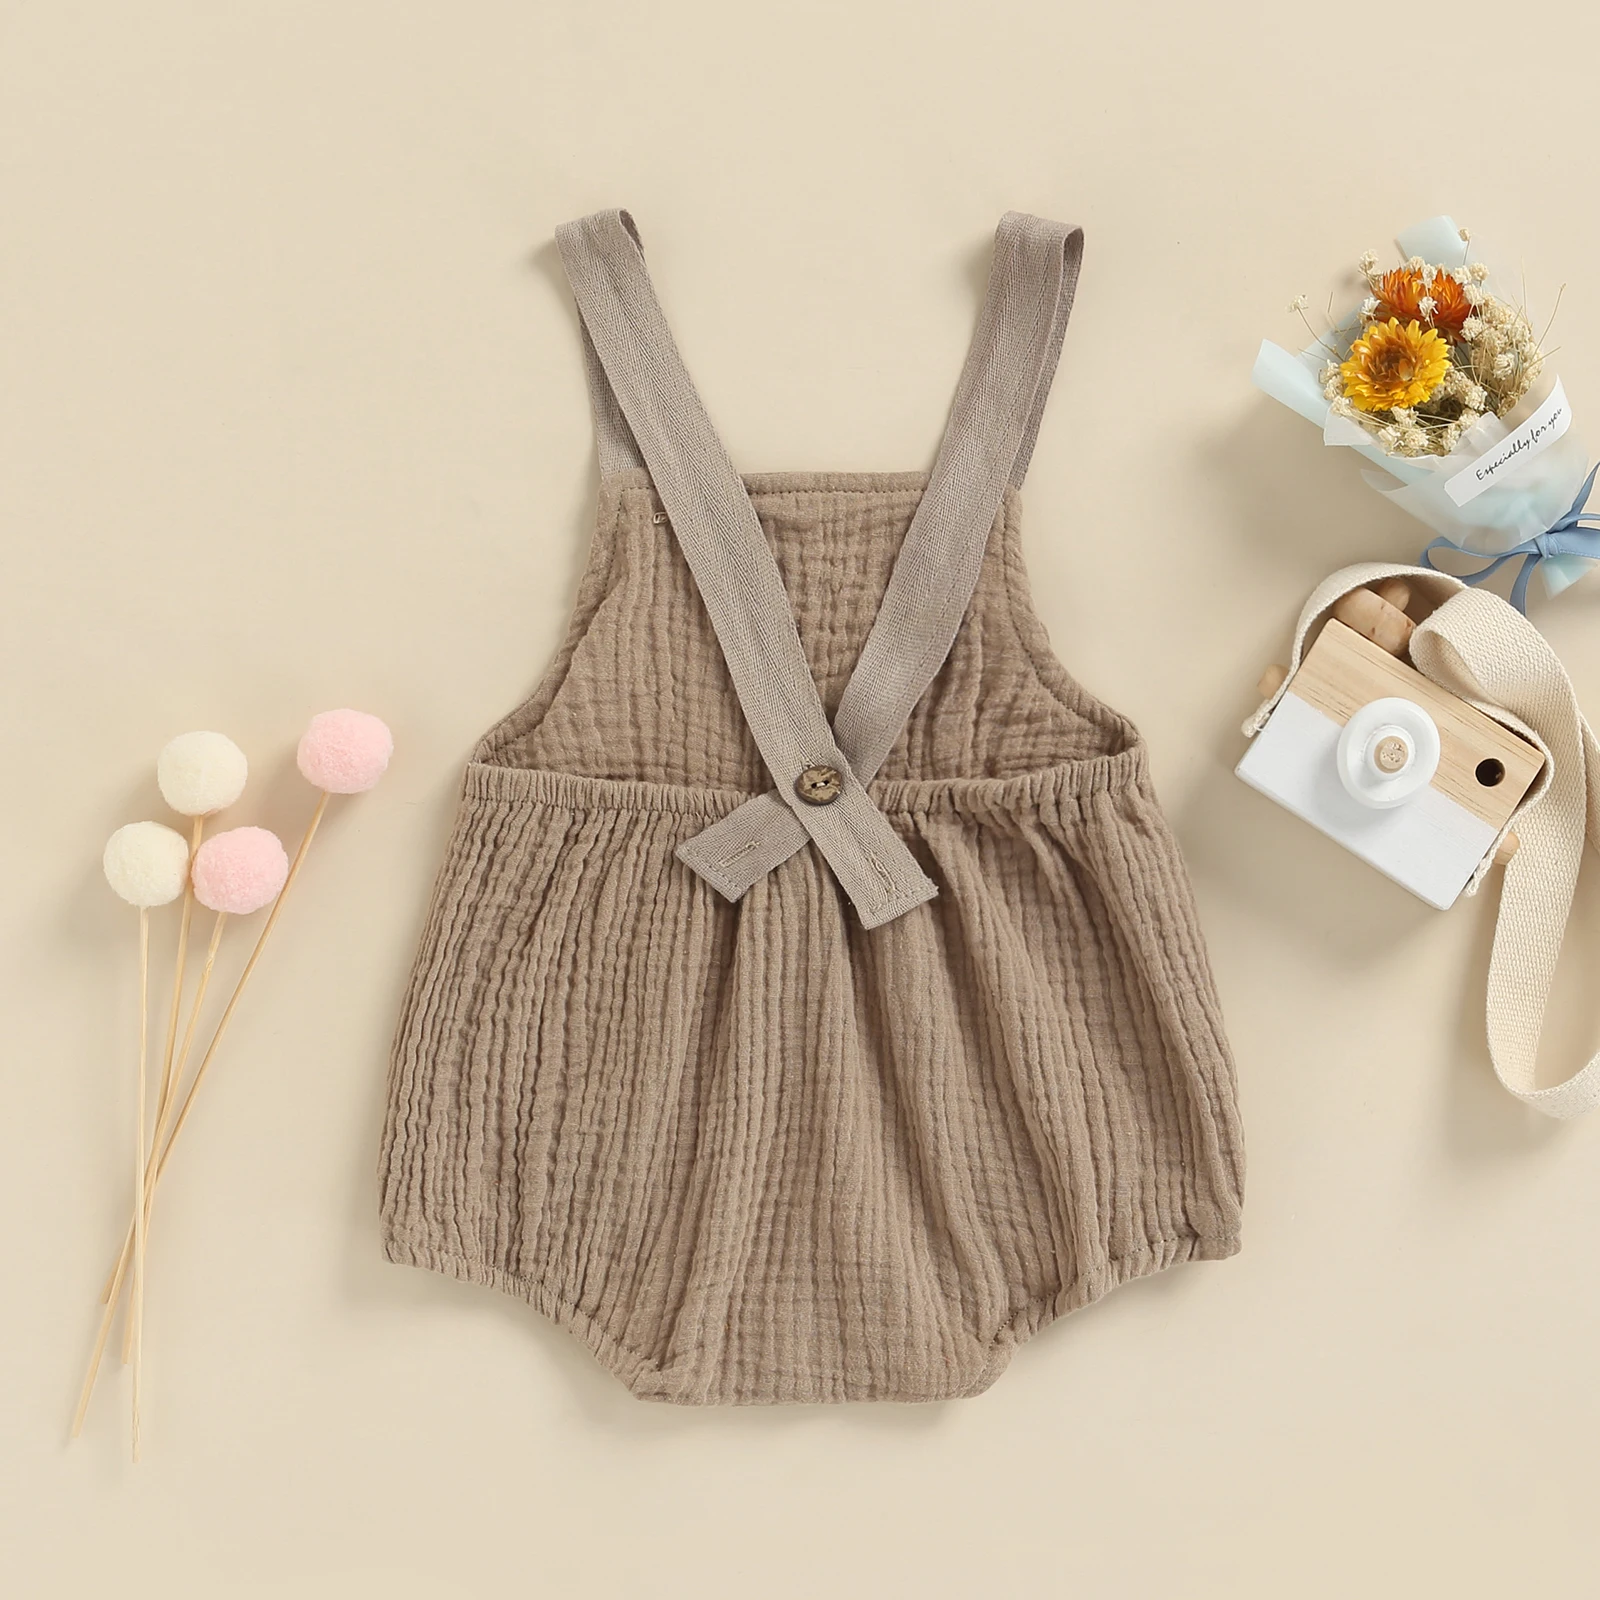 Bamboo fiber children's clothes Ma&Baby 0-18M Newborn Infant Baby Girls Boys Overalls Summer Button Rompers Sleeveless Jumpsuit Playsuit Baby Costumes D35 Baby Bodysuits medium